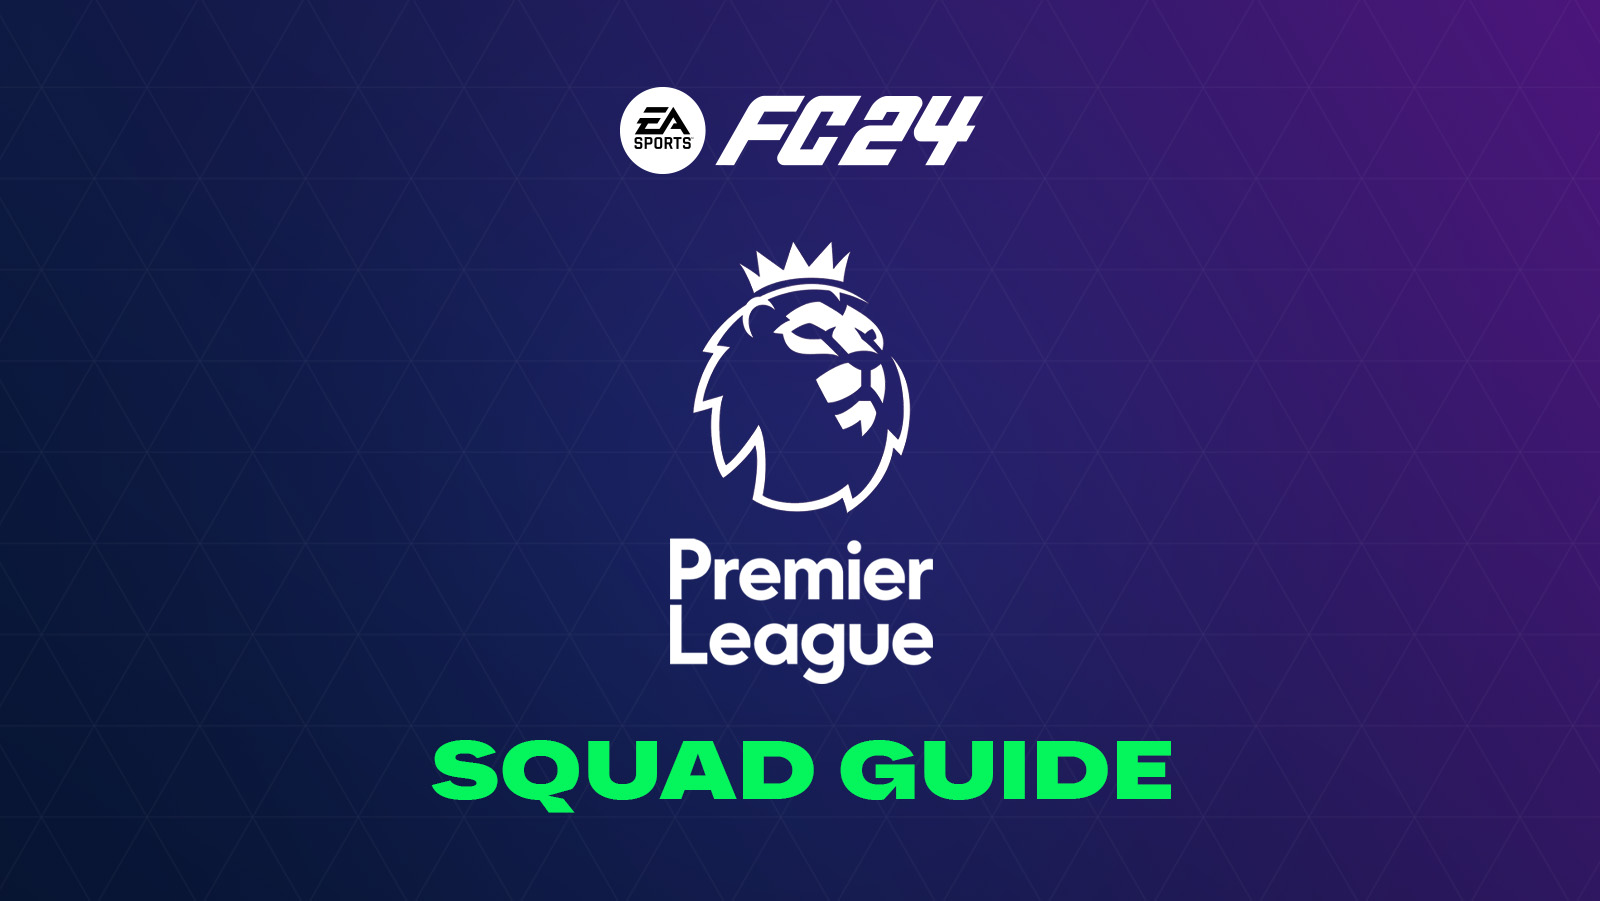 Learn how to have a Premier League squad in FC 24 Ultimate Team from a low budget to an expensive cost.